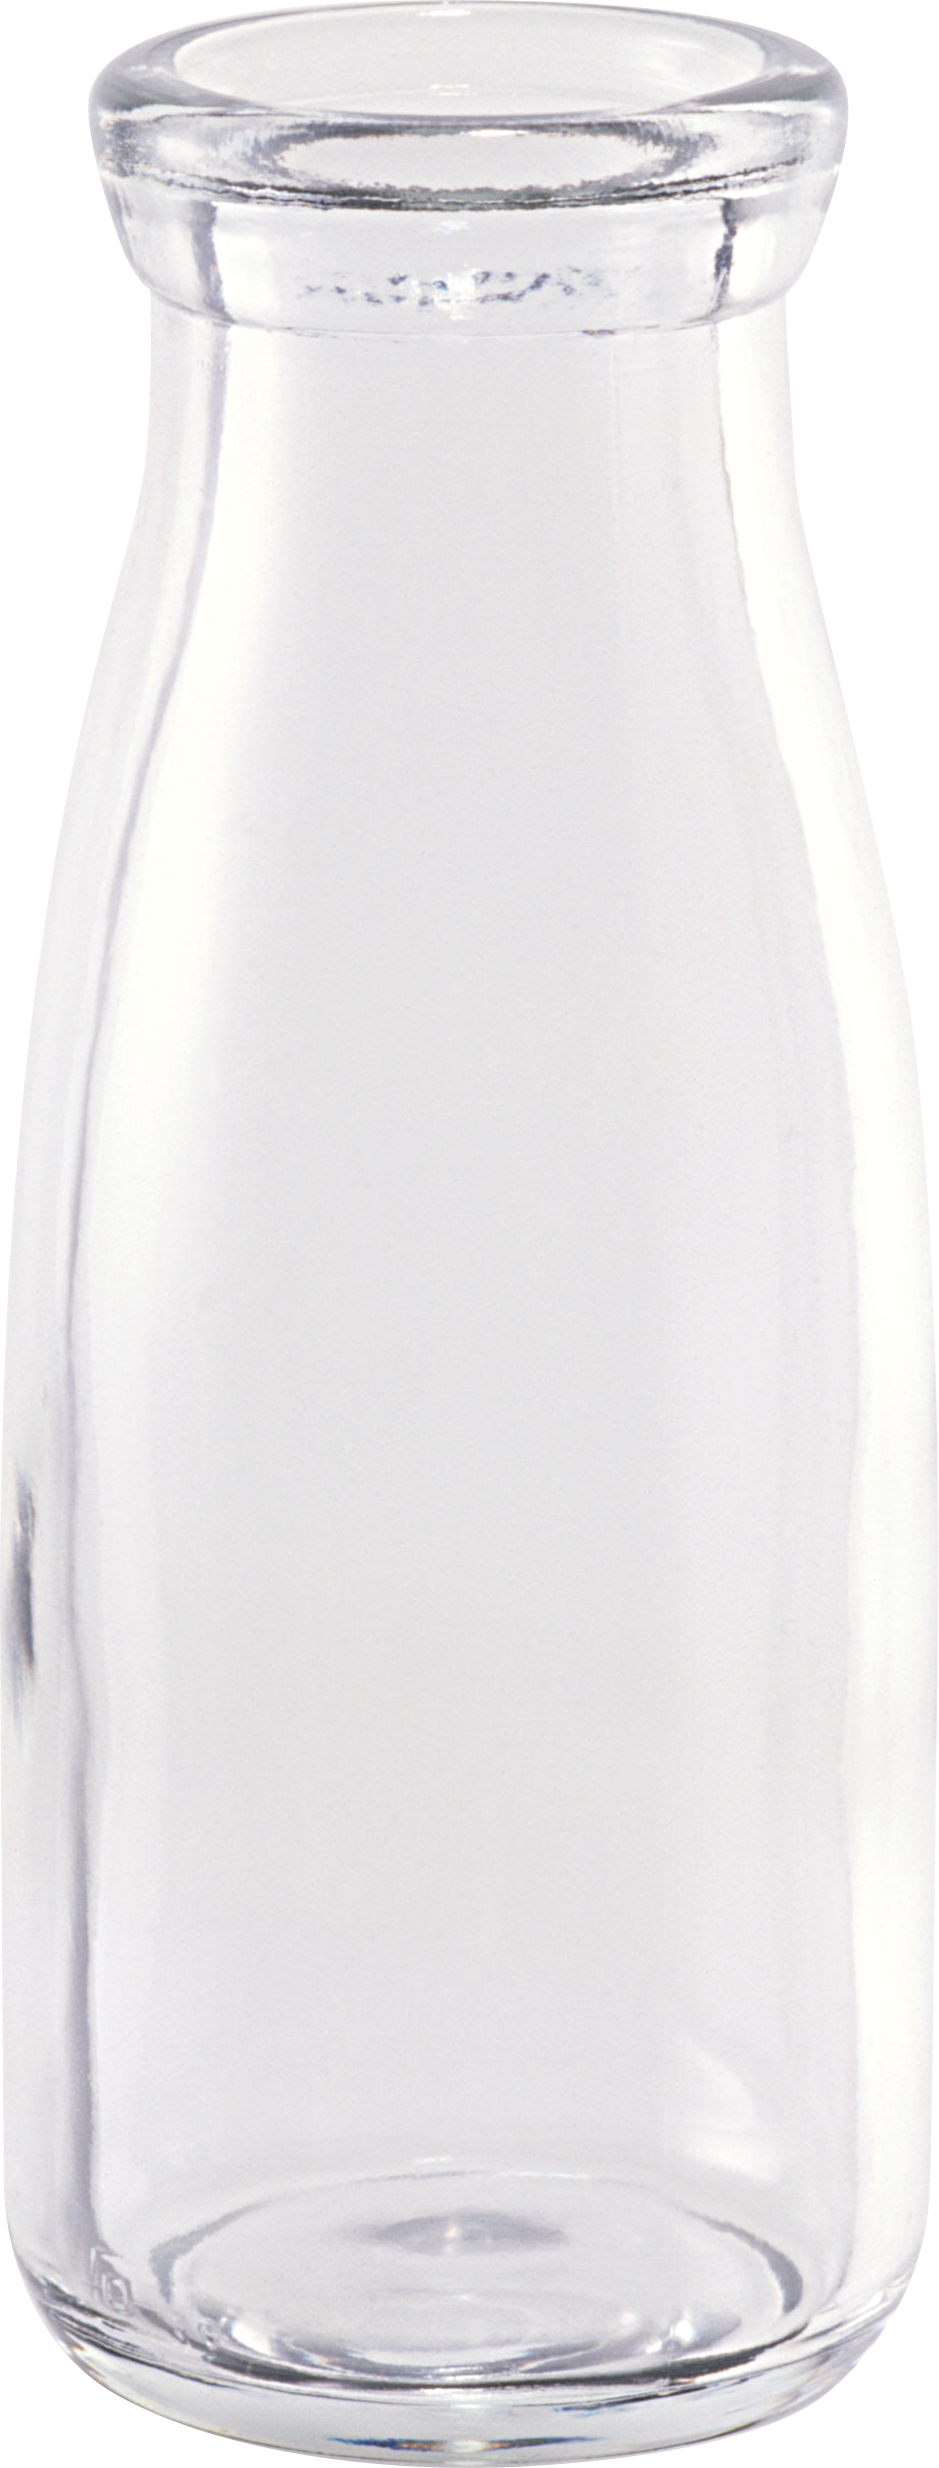 empty glass bottle PNG image